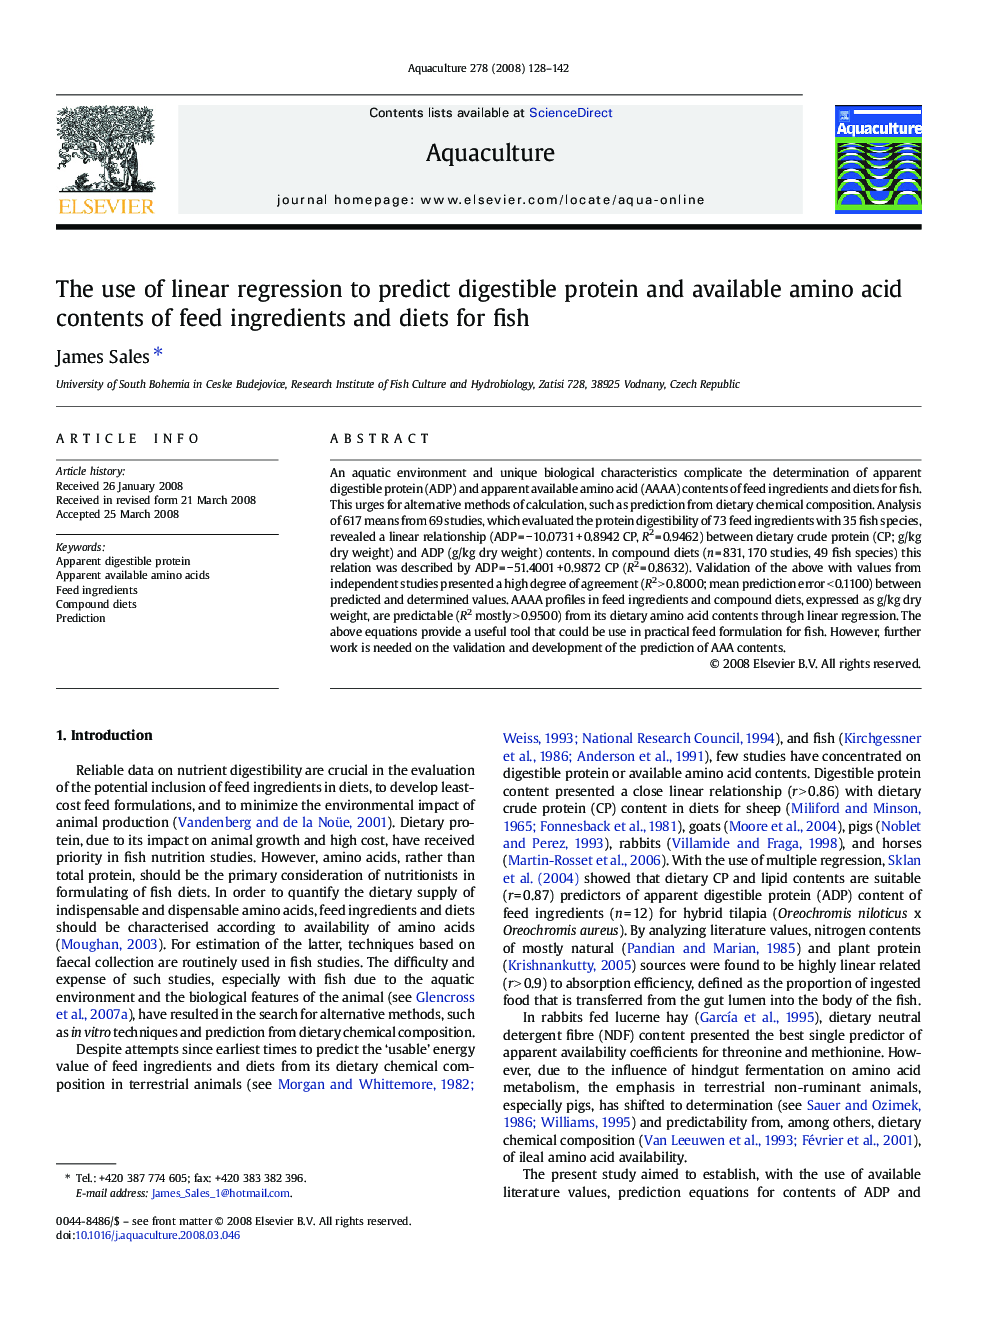 The use of linear regression to predict digestible protein and available amino acid contents of feed ingredients and diets for fish